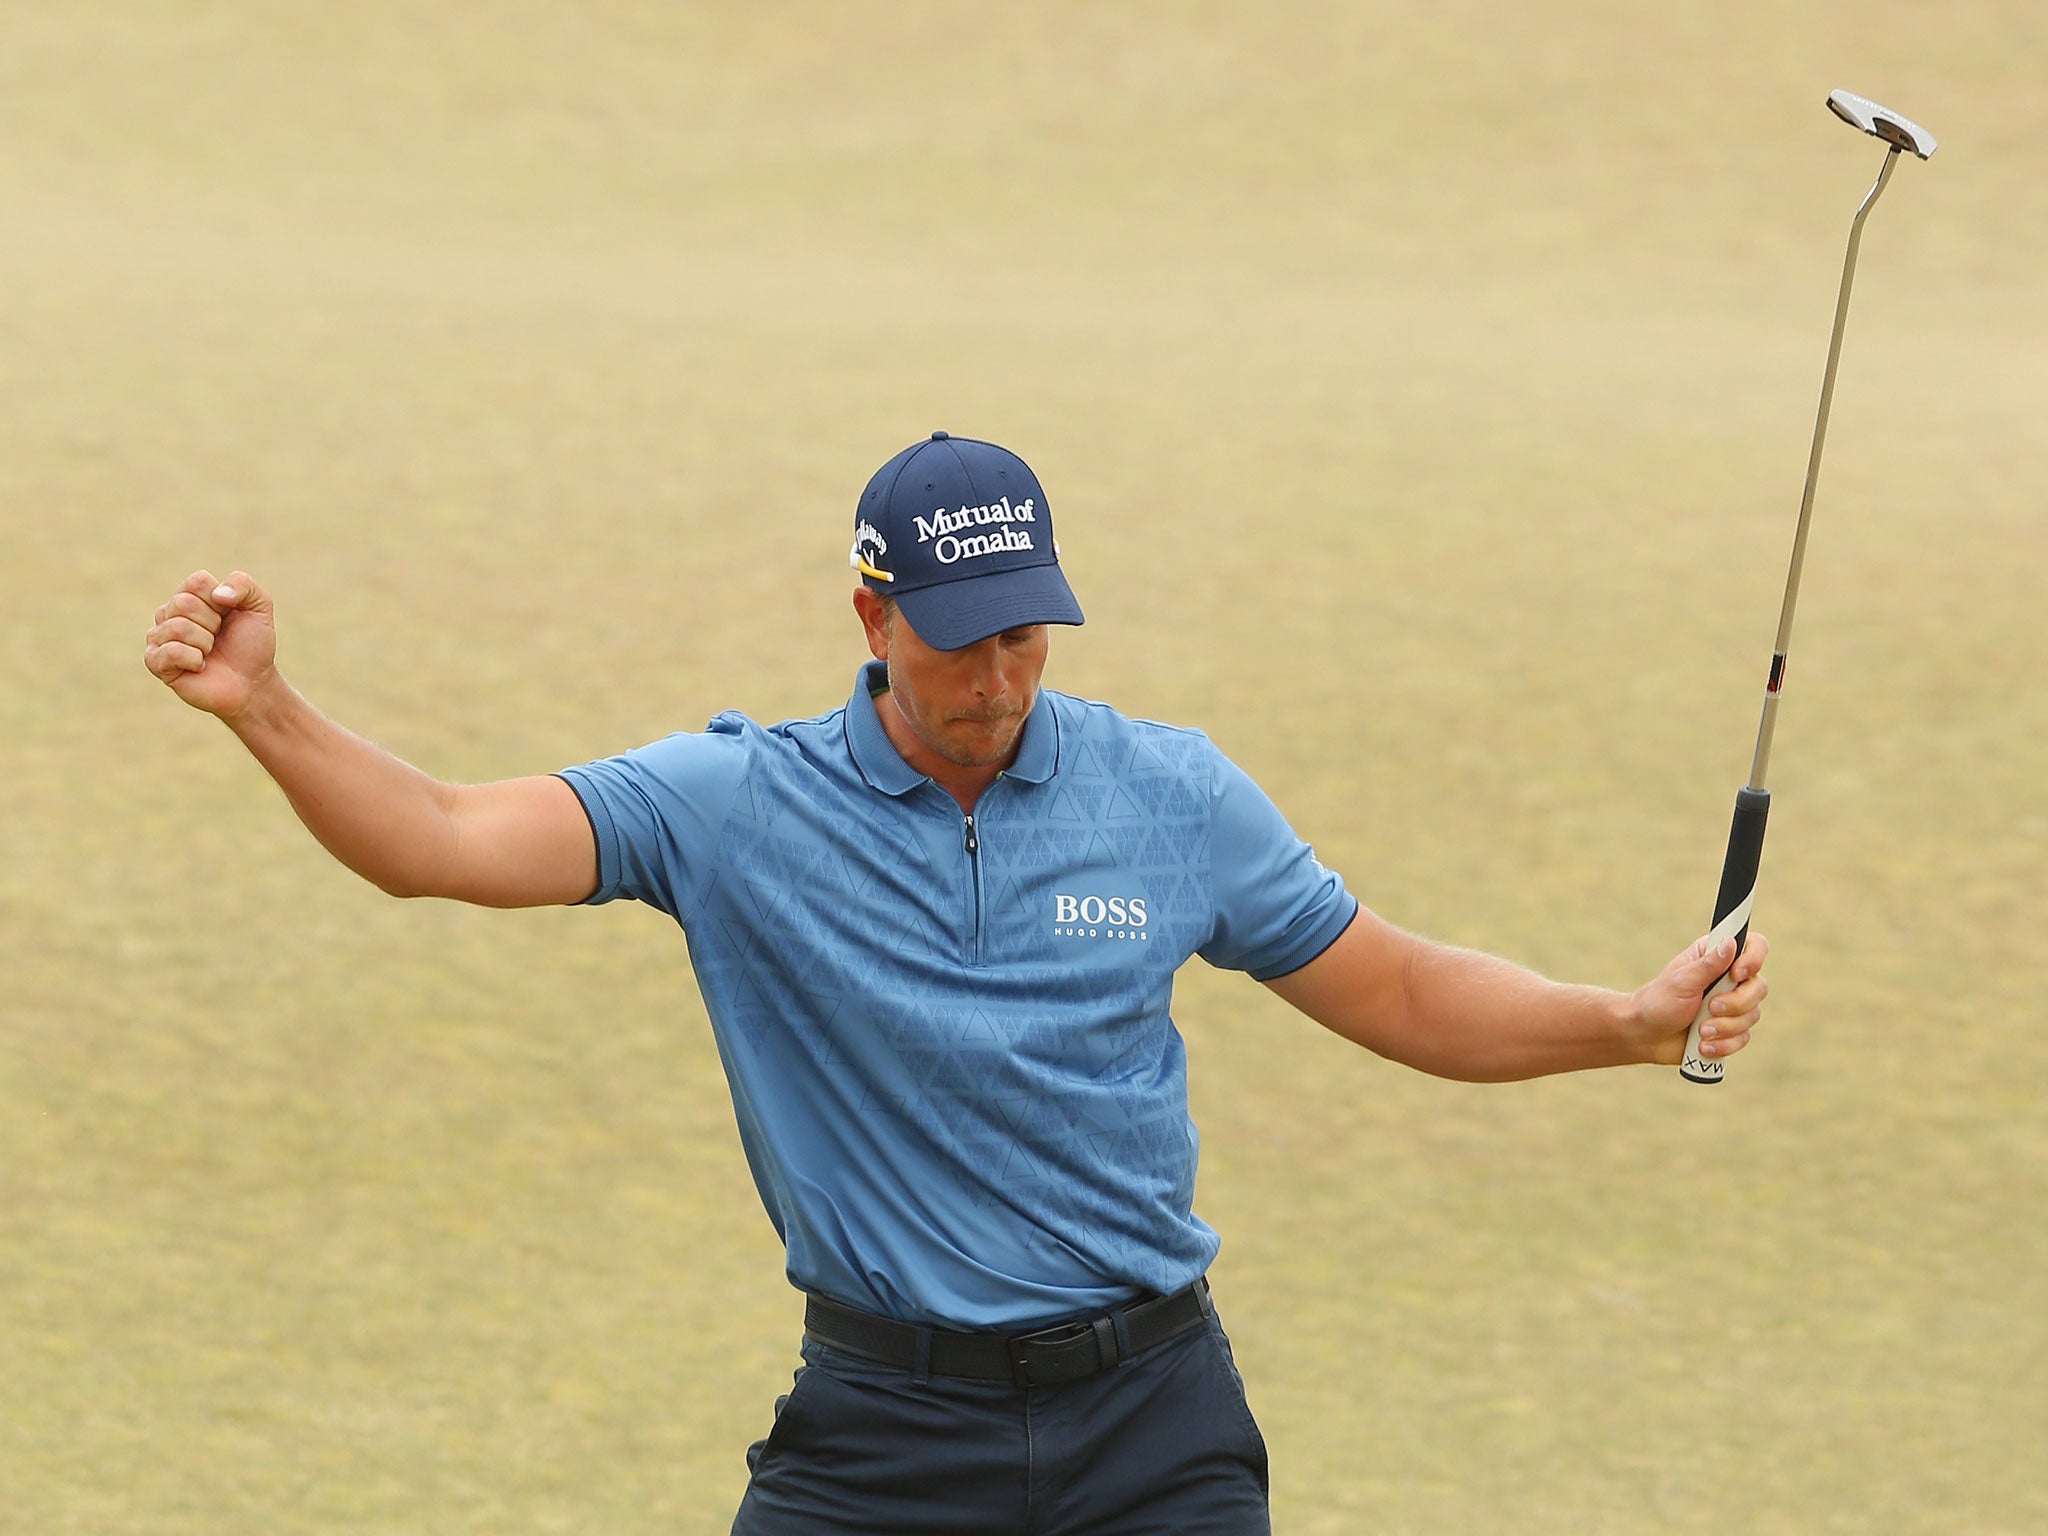 Henrik Stenson celebrates after sinking a 30-foot putt on the 18th